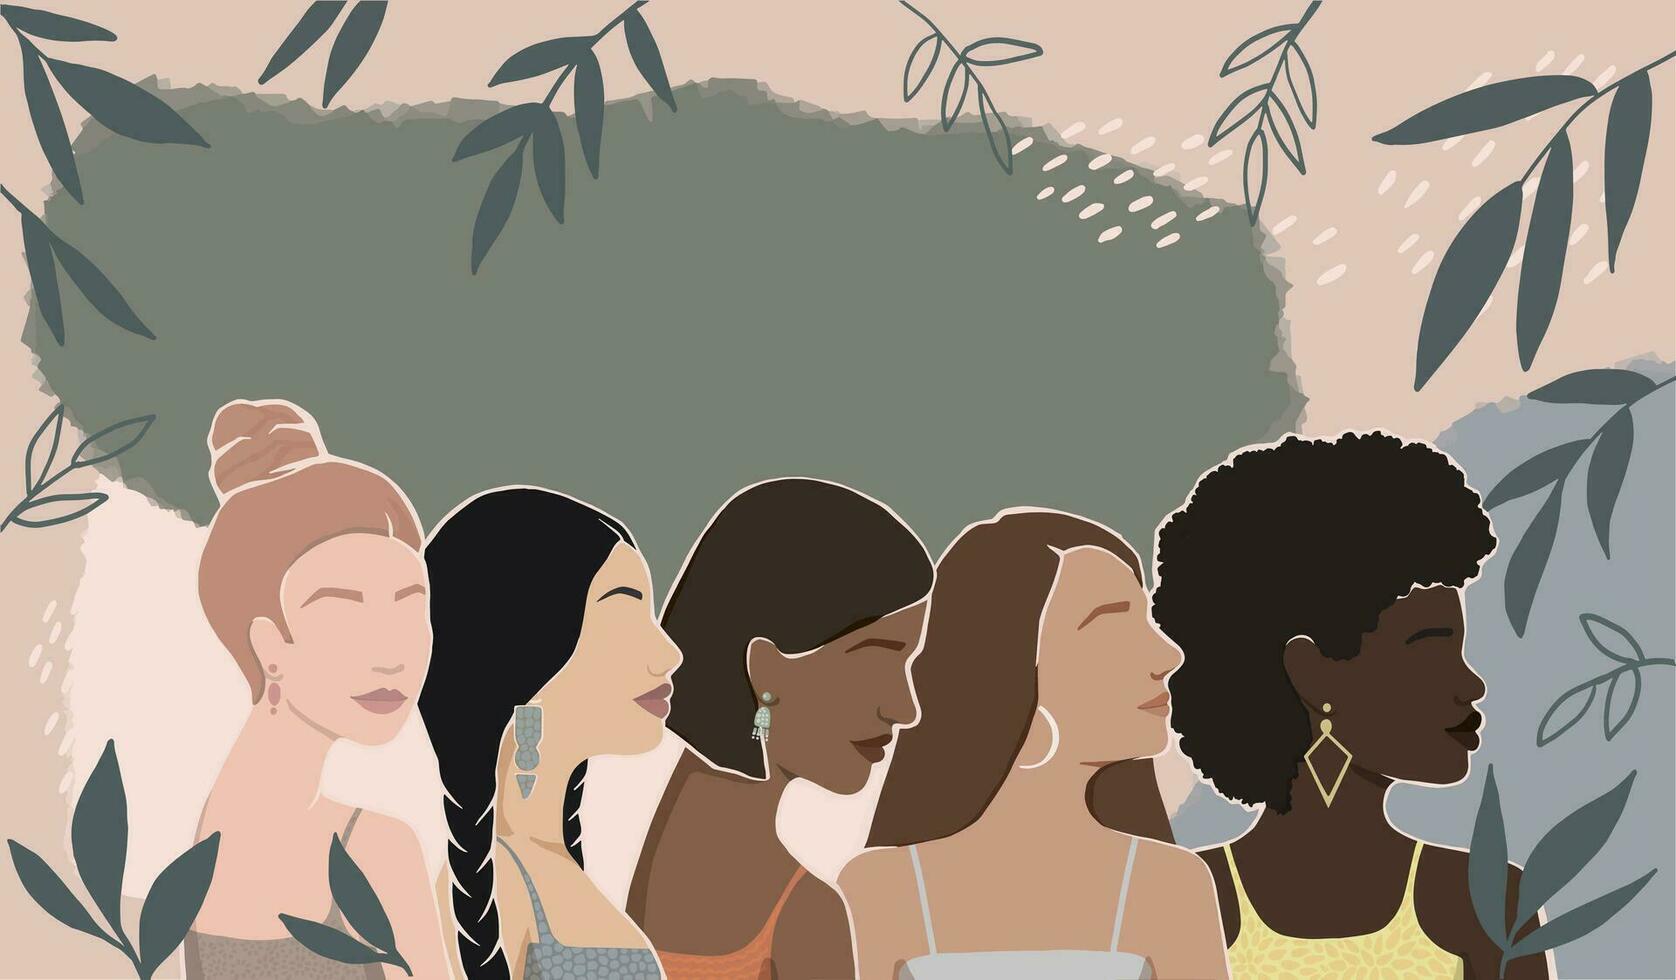 Diverse women together. Abstract illustration with leaves and spots. vector